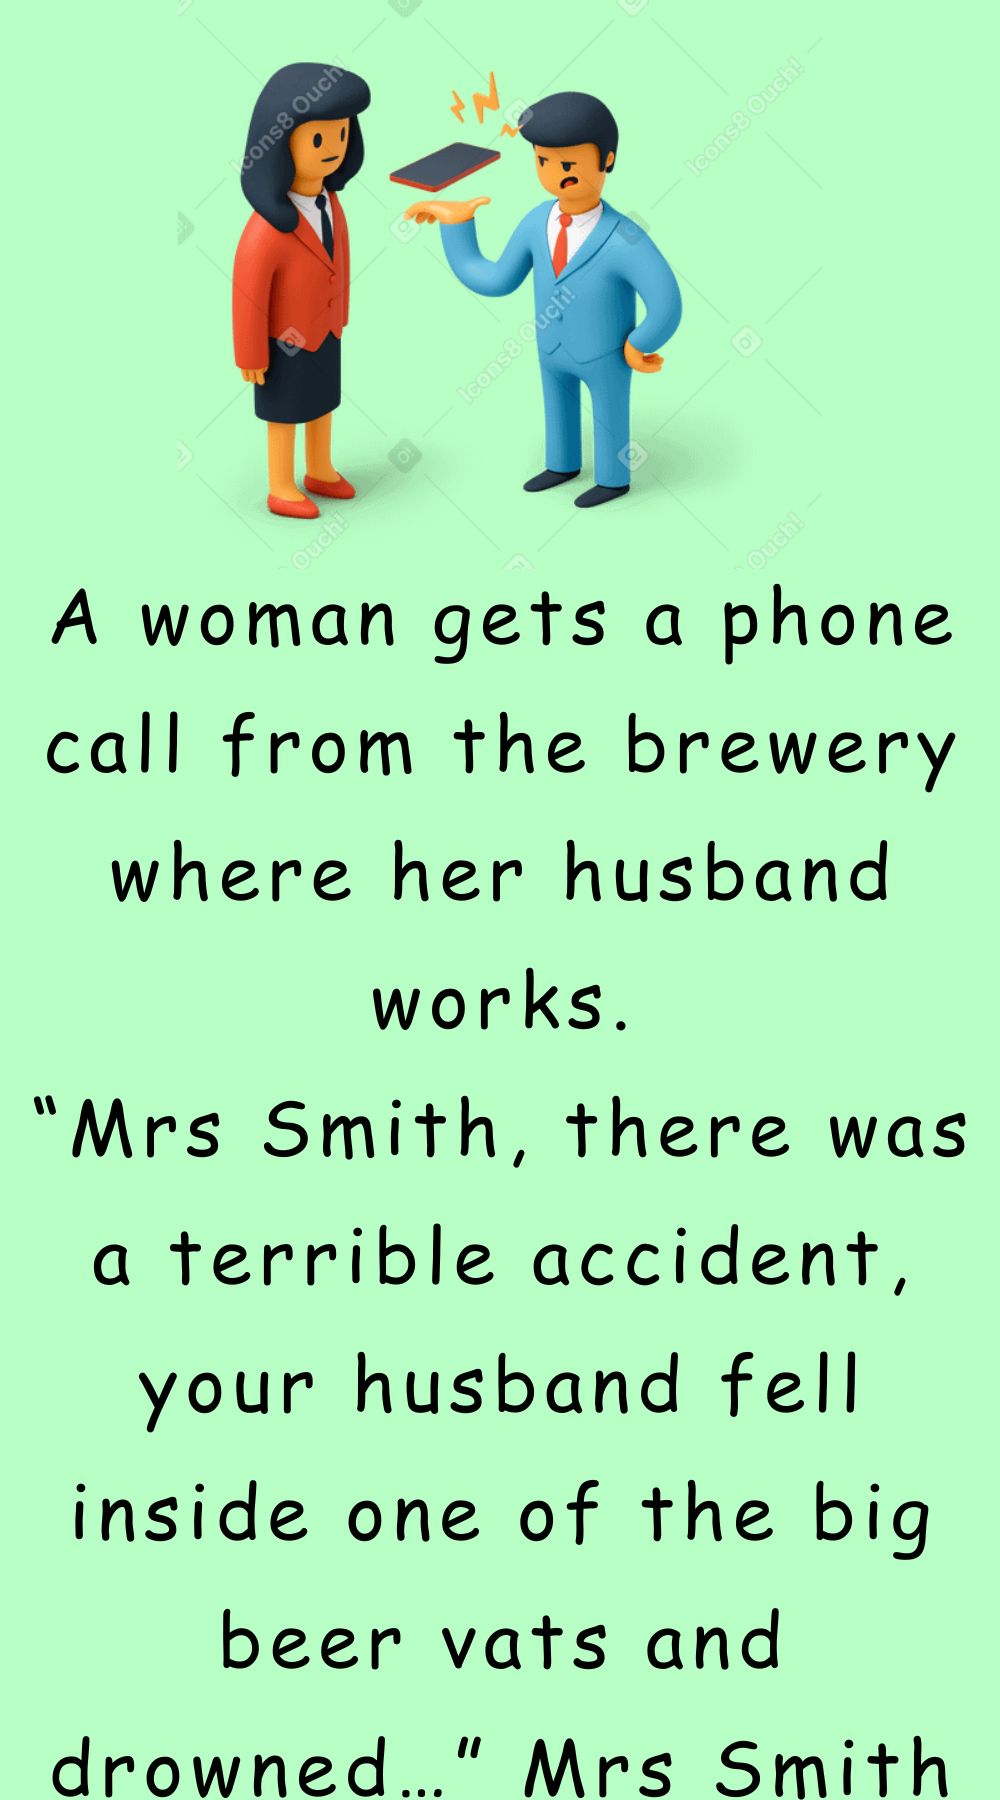 A woman gets a phone call from the brewery